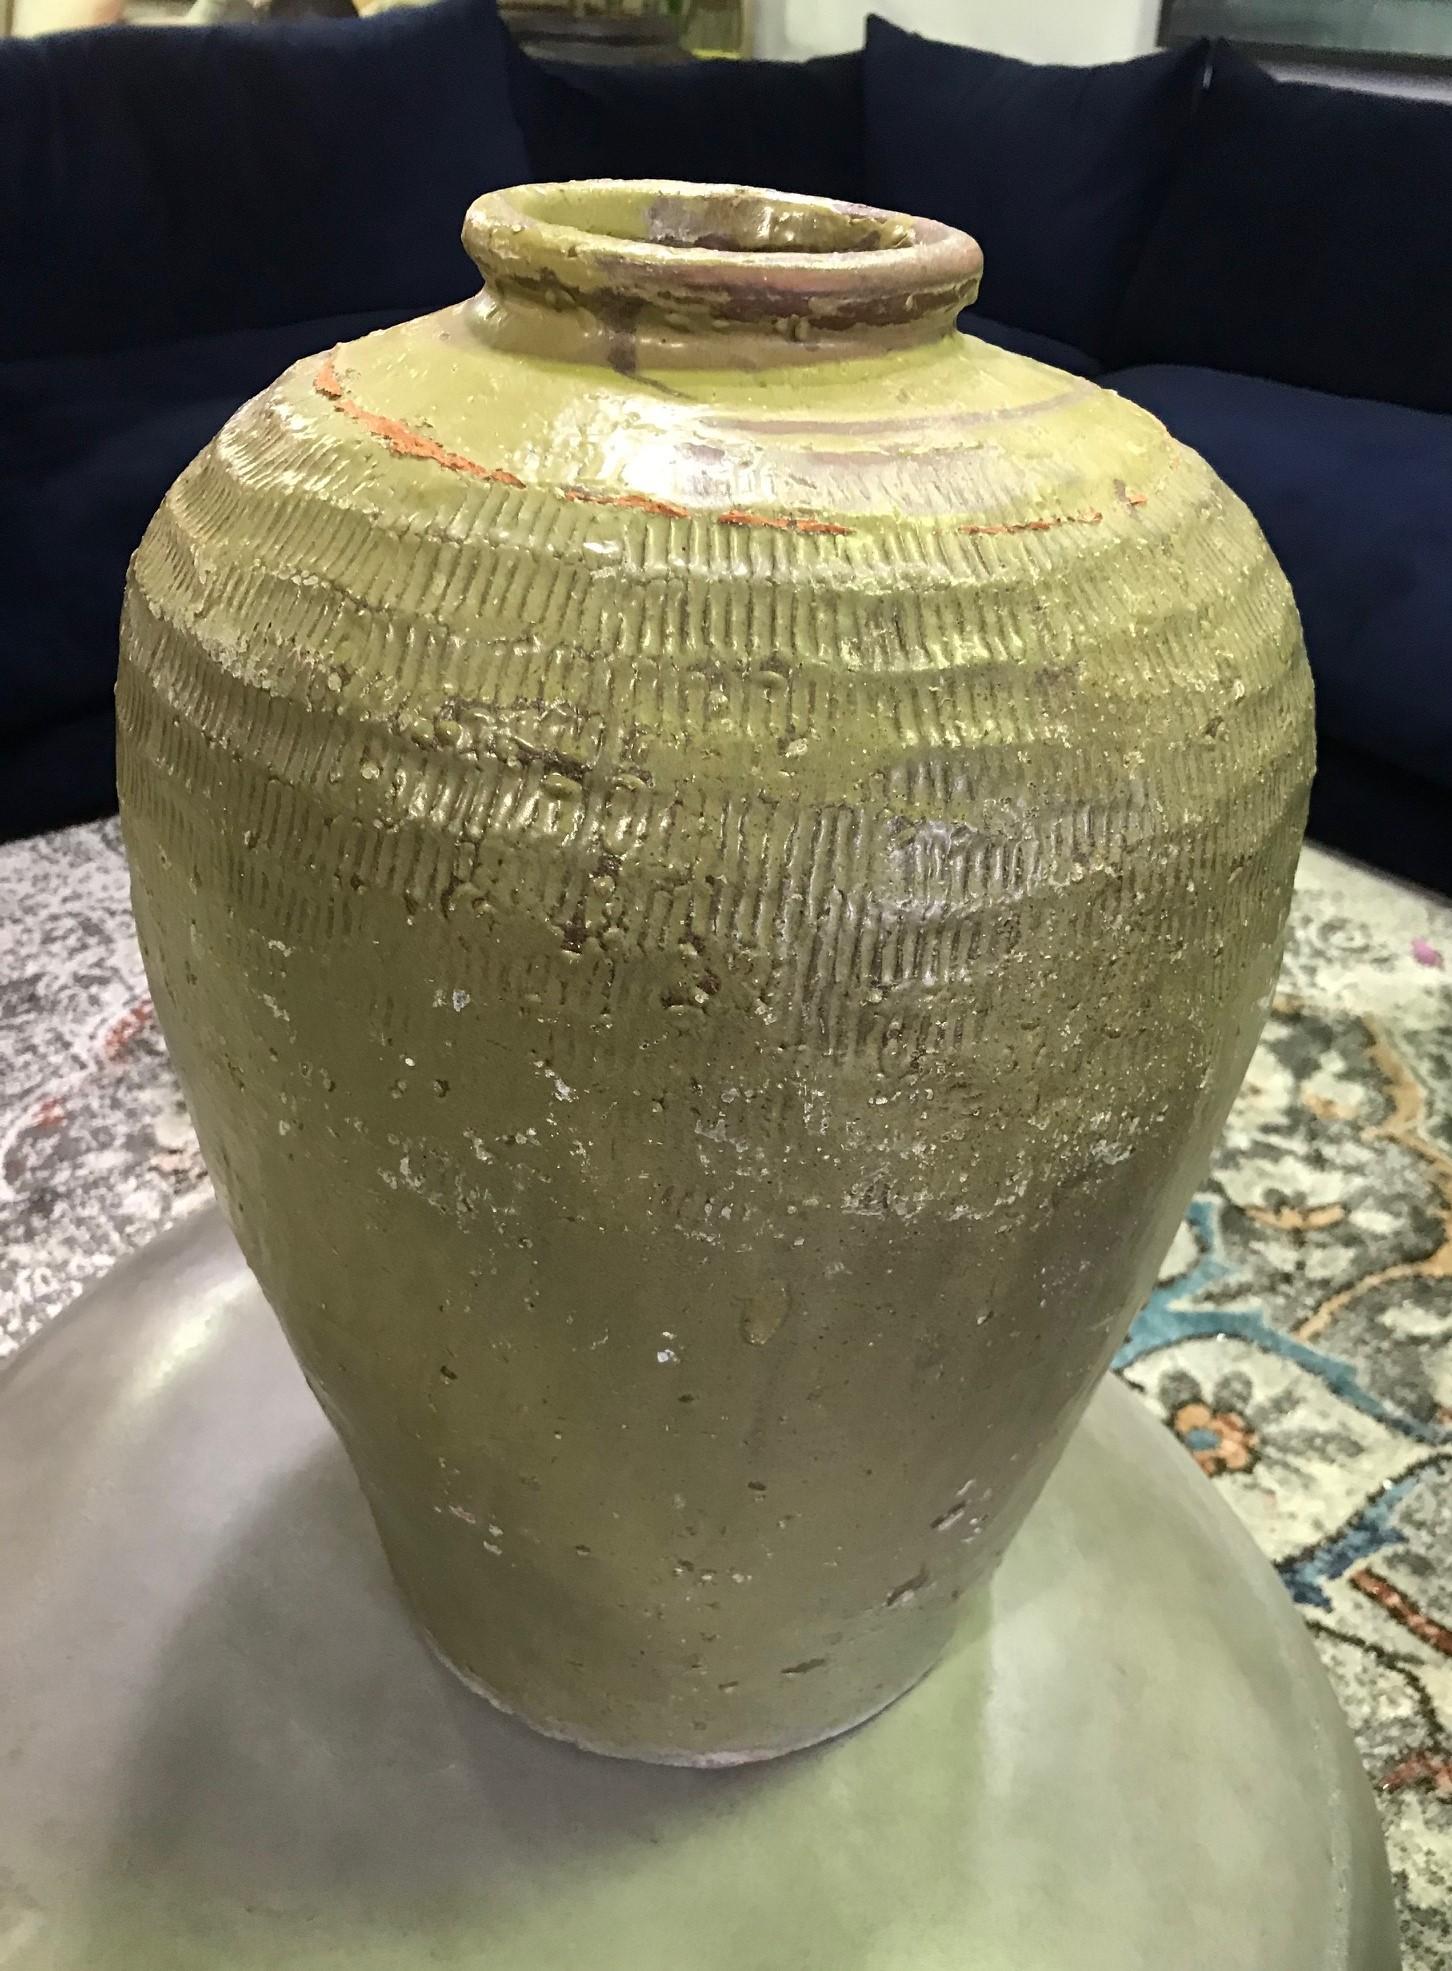 A truly wonderfully made and textured, richly colored large earthenware vase or jar.

From a group of three vases (please see photos) we acquired from a high-end Southern California estate.

Would clearly stand out in about any setting indoors